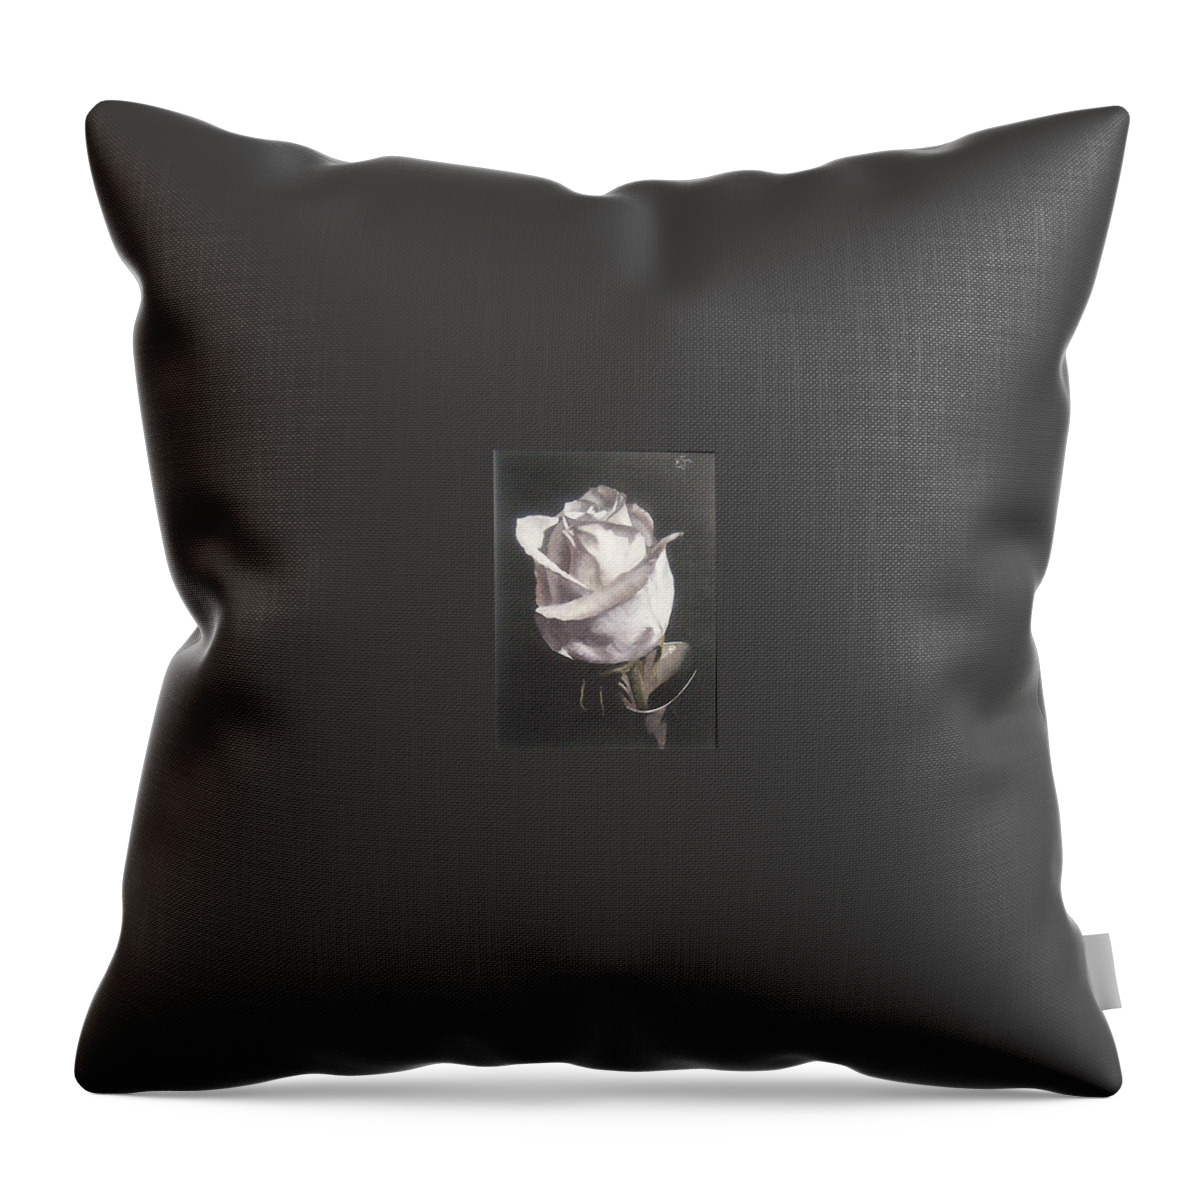 Rose Floral Nature White Flower Throw Pillow featuring the painting Rose 2 by Natalia Tejera